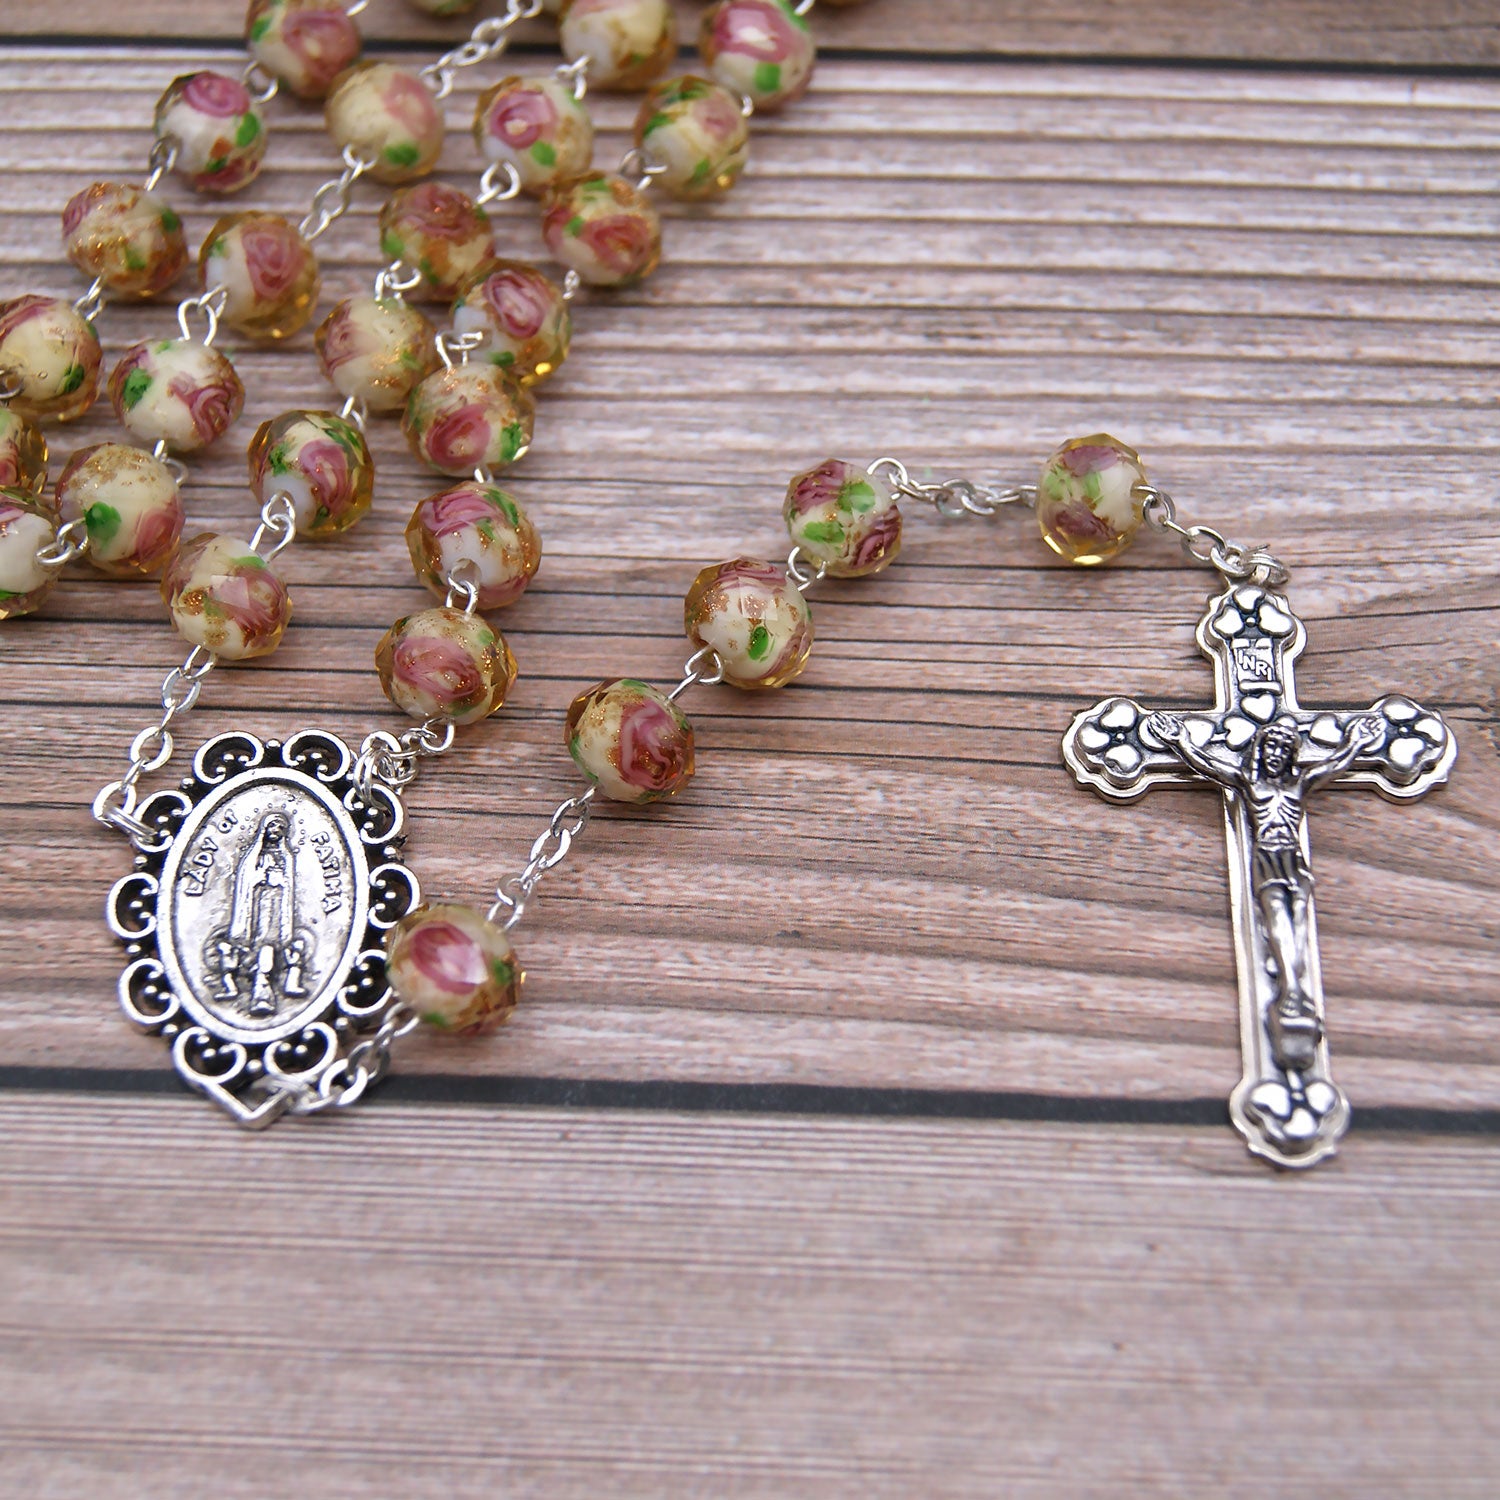 Catholic Handmade Our Lady of Fatima Rosary Murano Glass Beads Made in Portugal